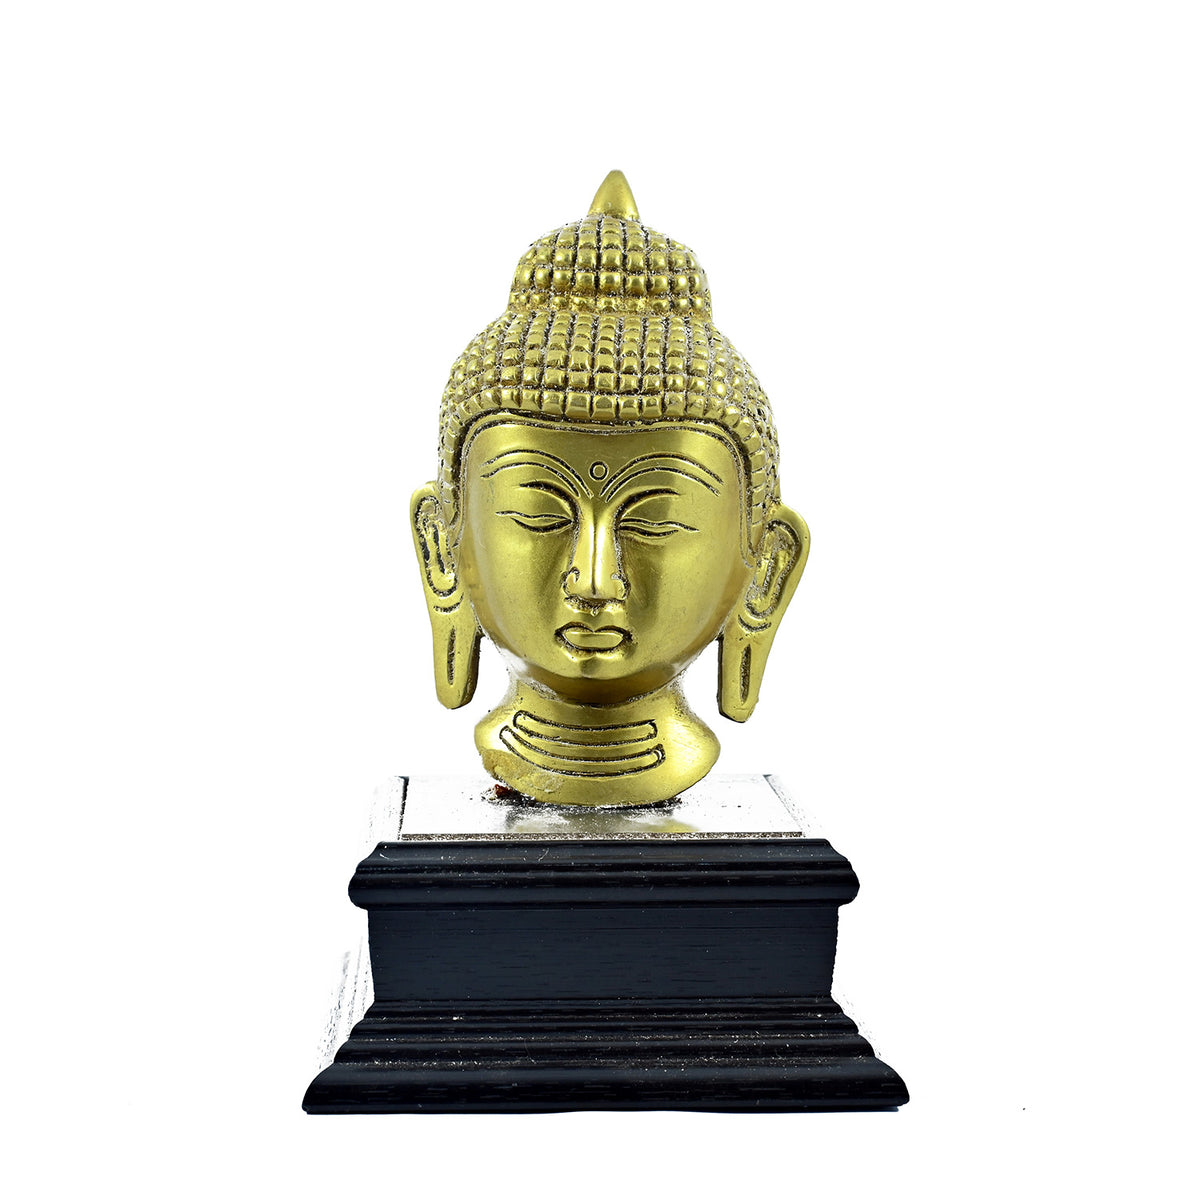 SmileSellers Hand made design of brass Head of Buddha in wooden base